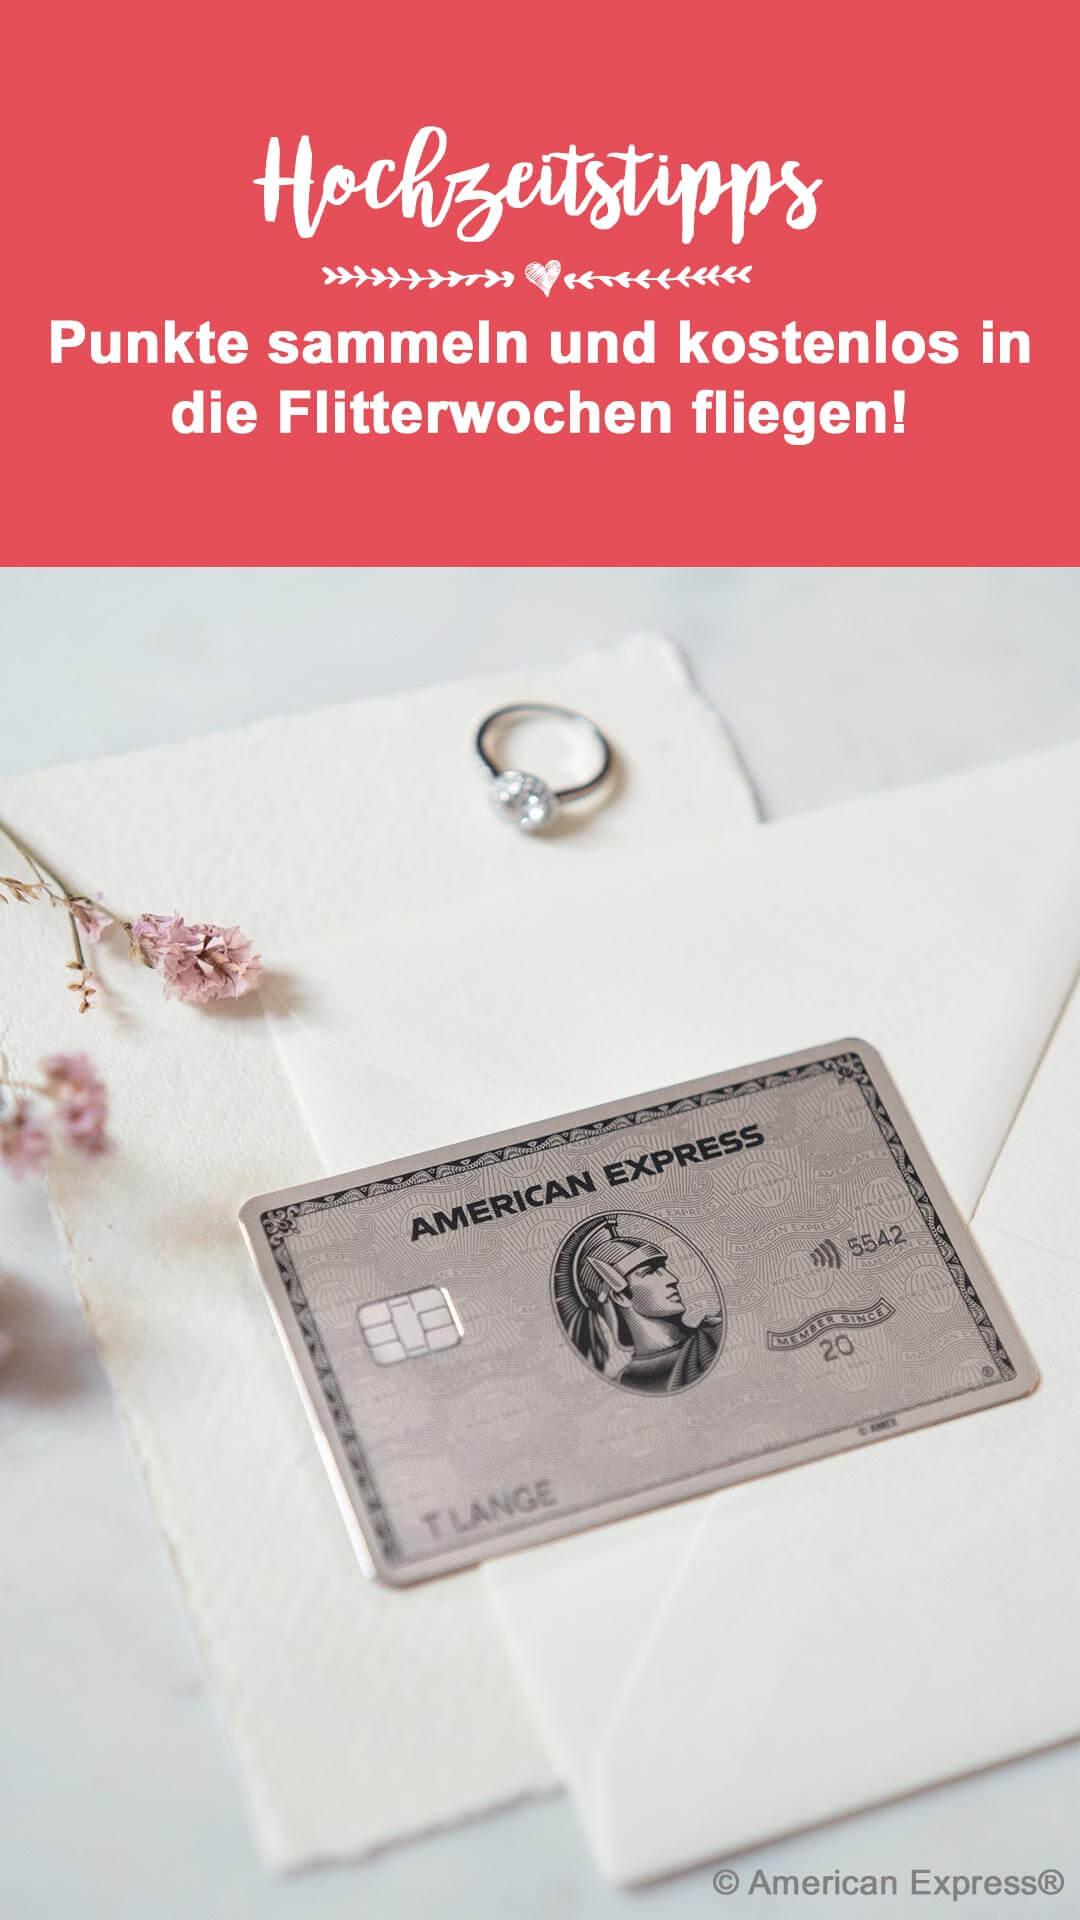 1632396140 989 Pay for the wedding with Amex® and go on your - Pay for the wedding with Amex® and go on your honeymoon for free!